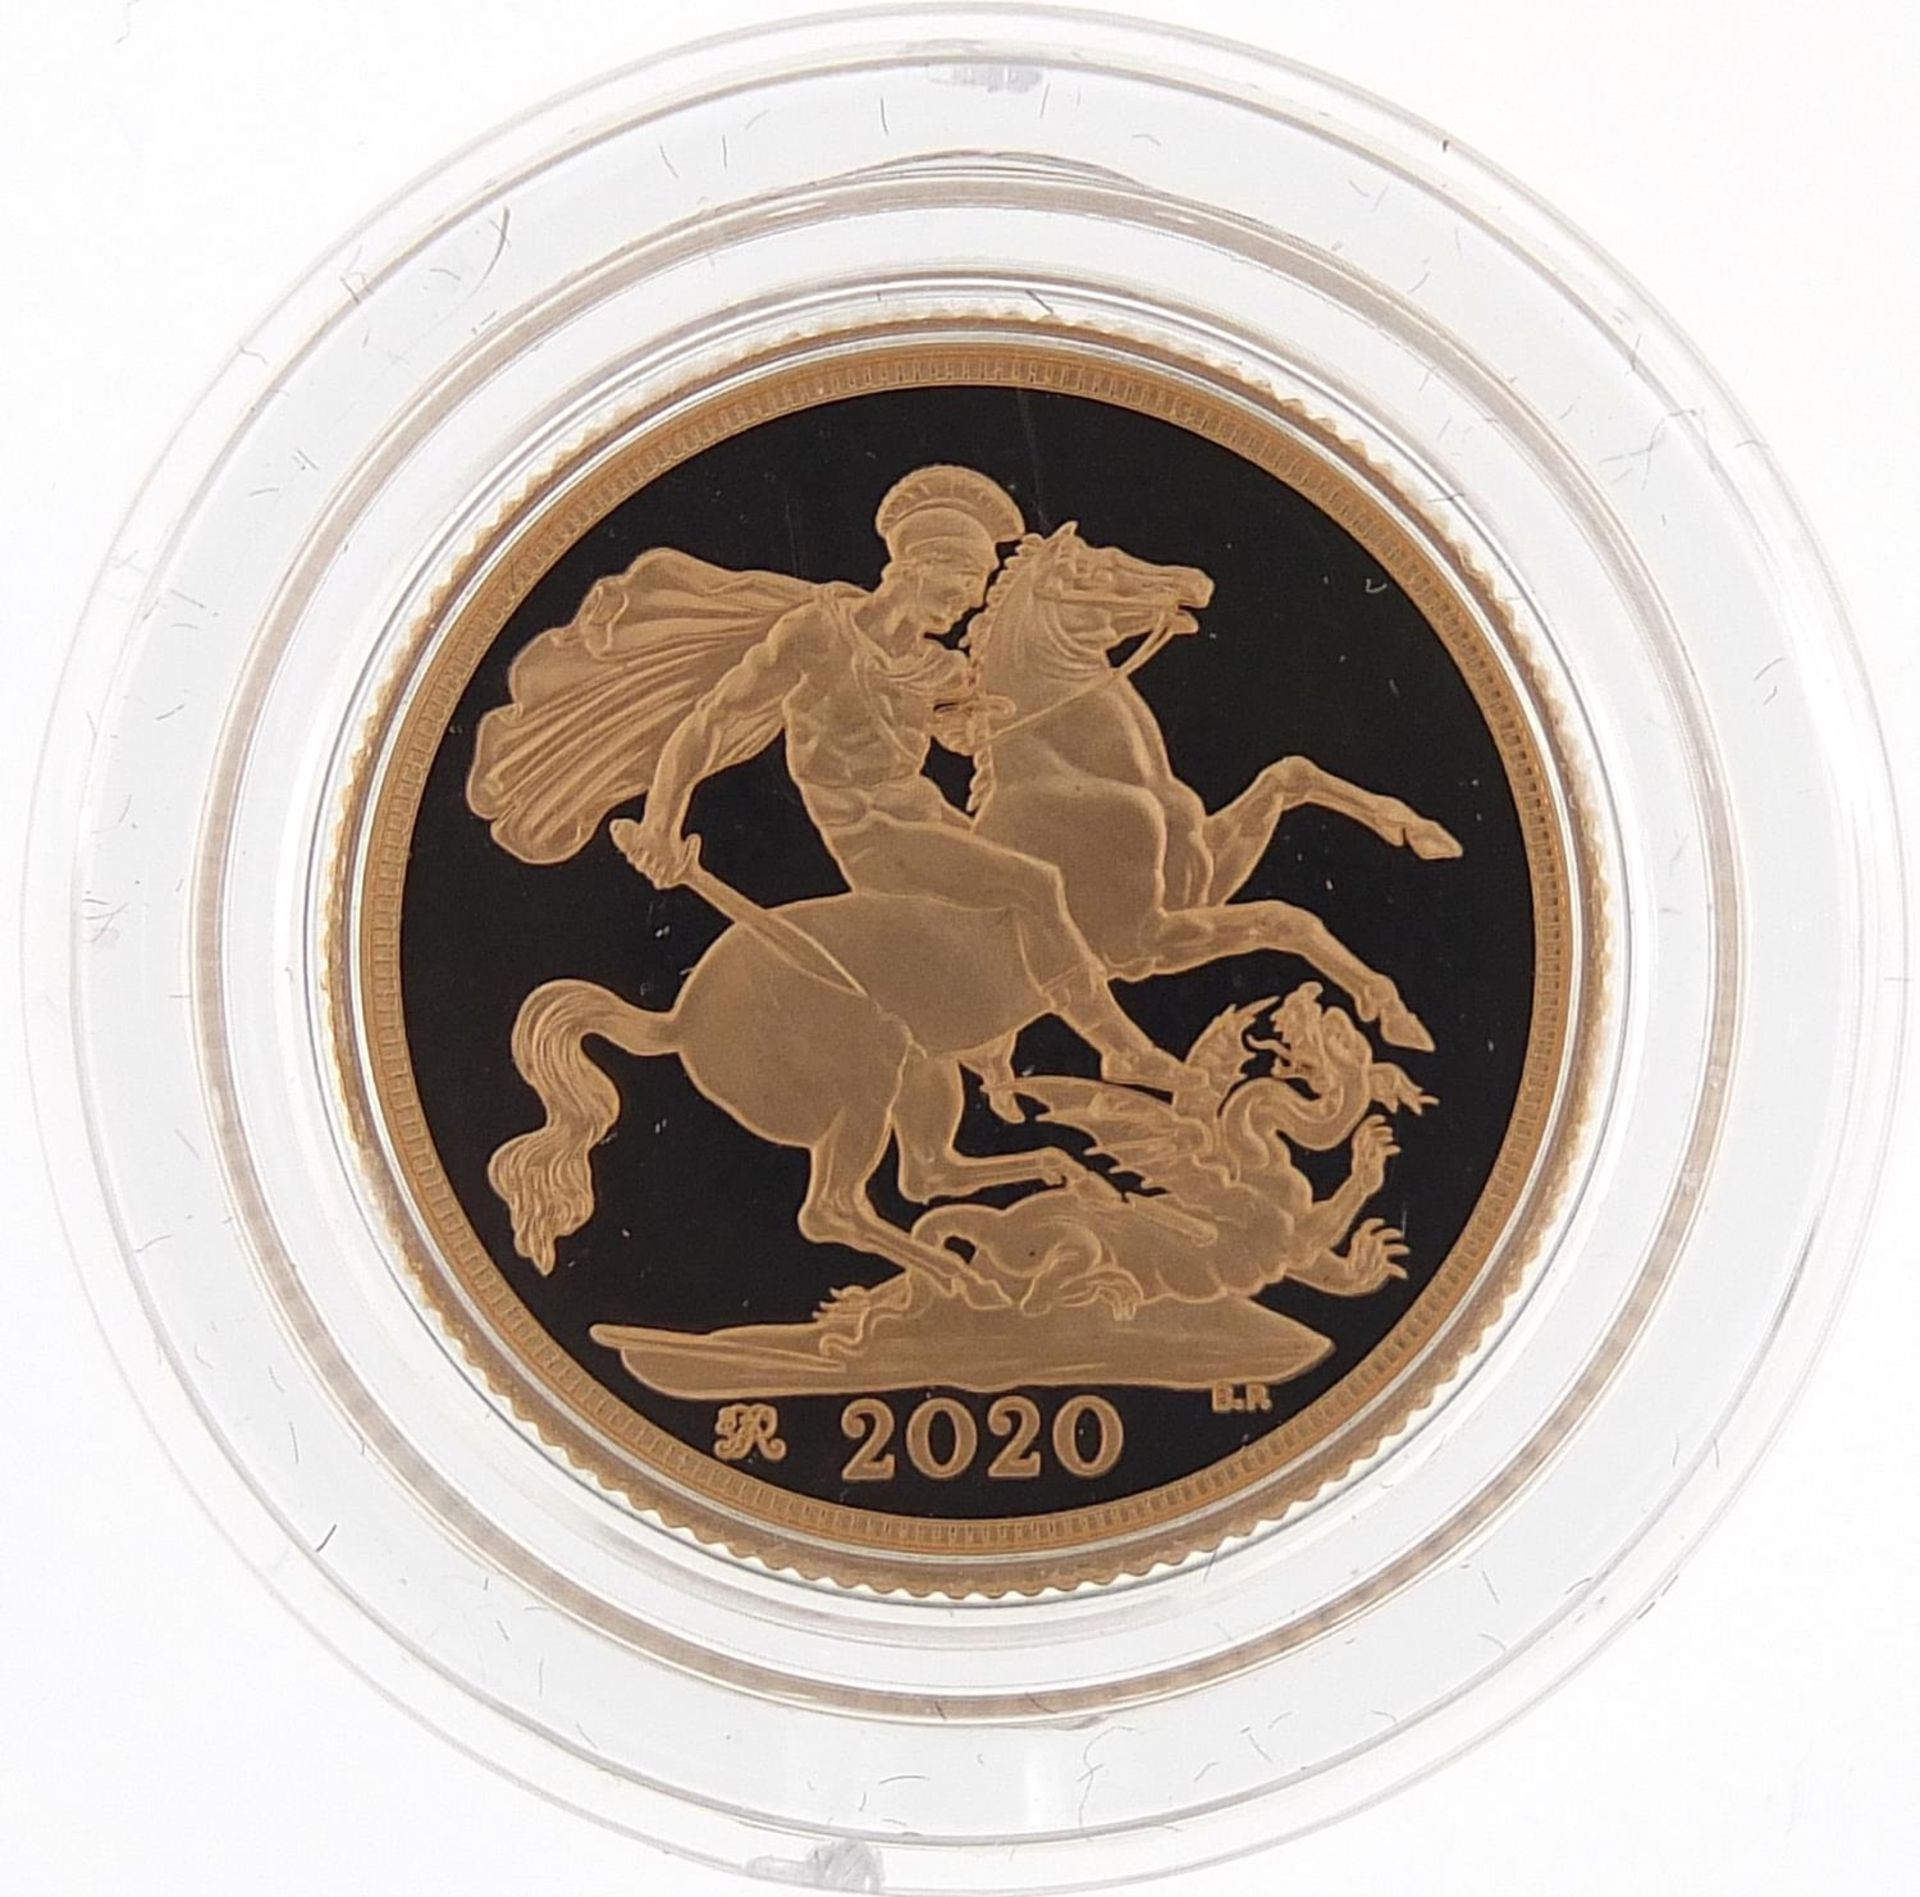 Elizabeth II 2020 gold proof sovereign with box and certificate, 7881/7995 - this lot is sold - Image 2 of 4